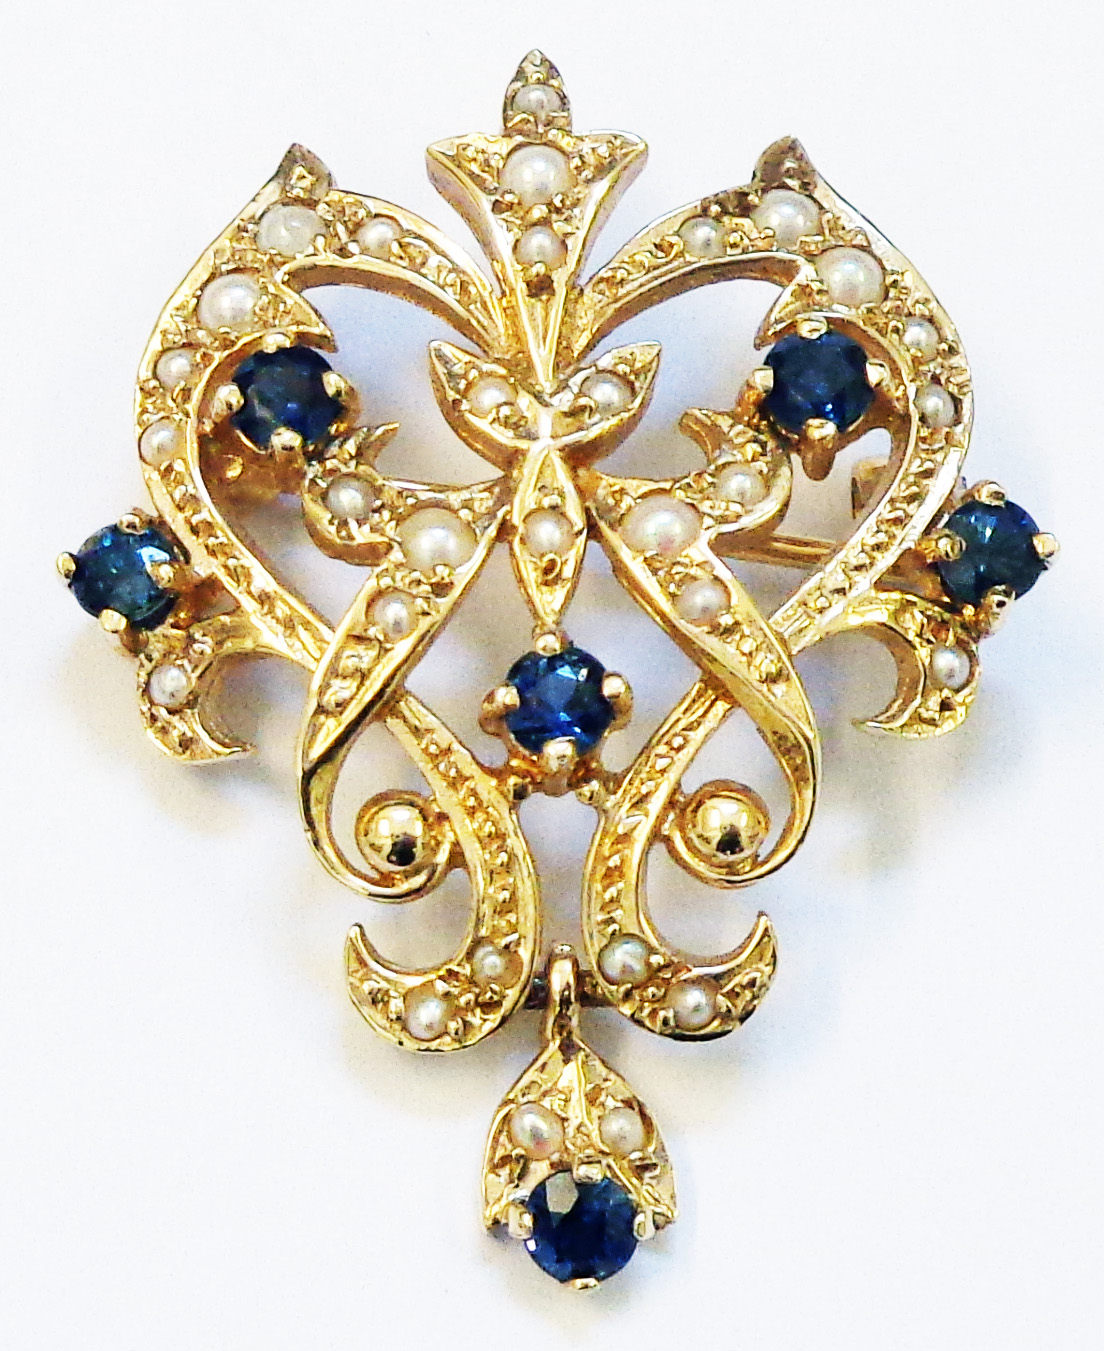 A hallmarked 375 gold Edwardian style open scroll pendant/brooch encrusted with seed pearls and